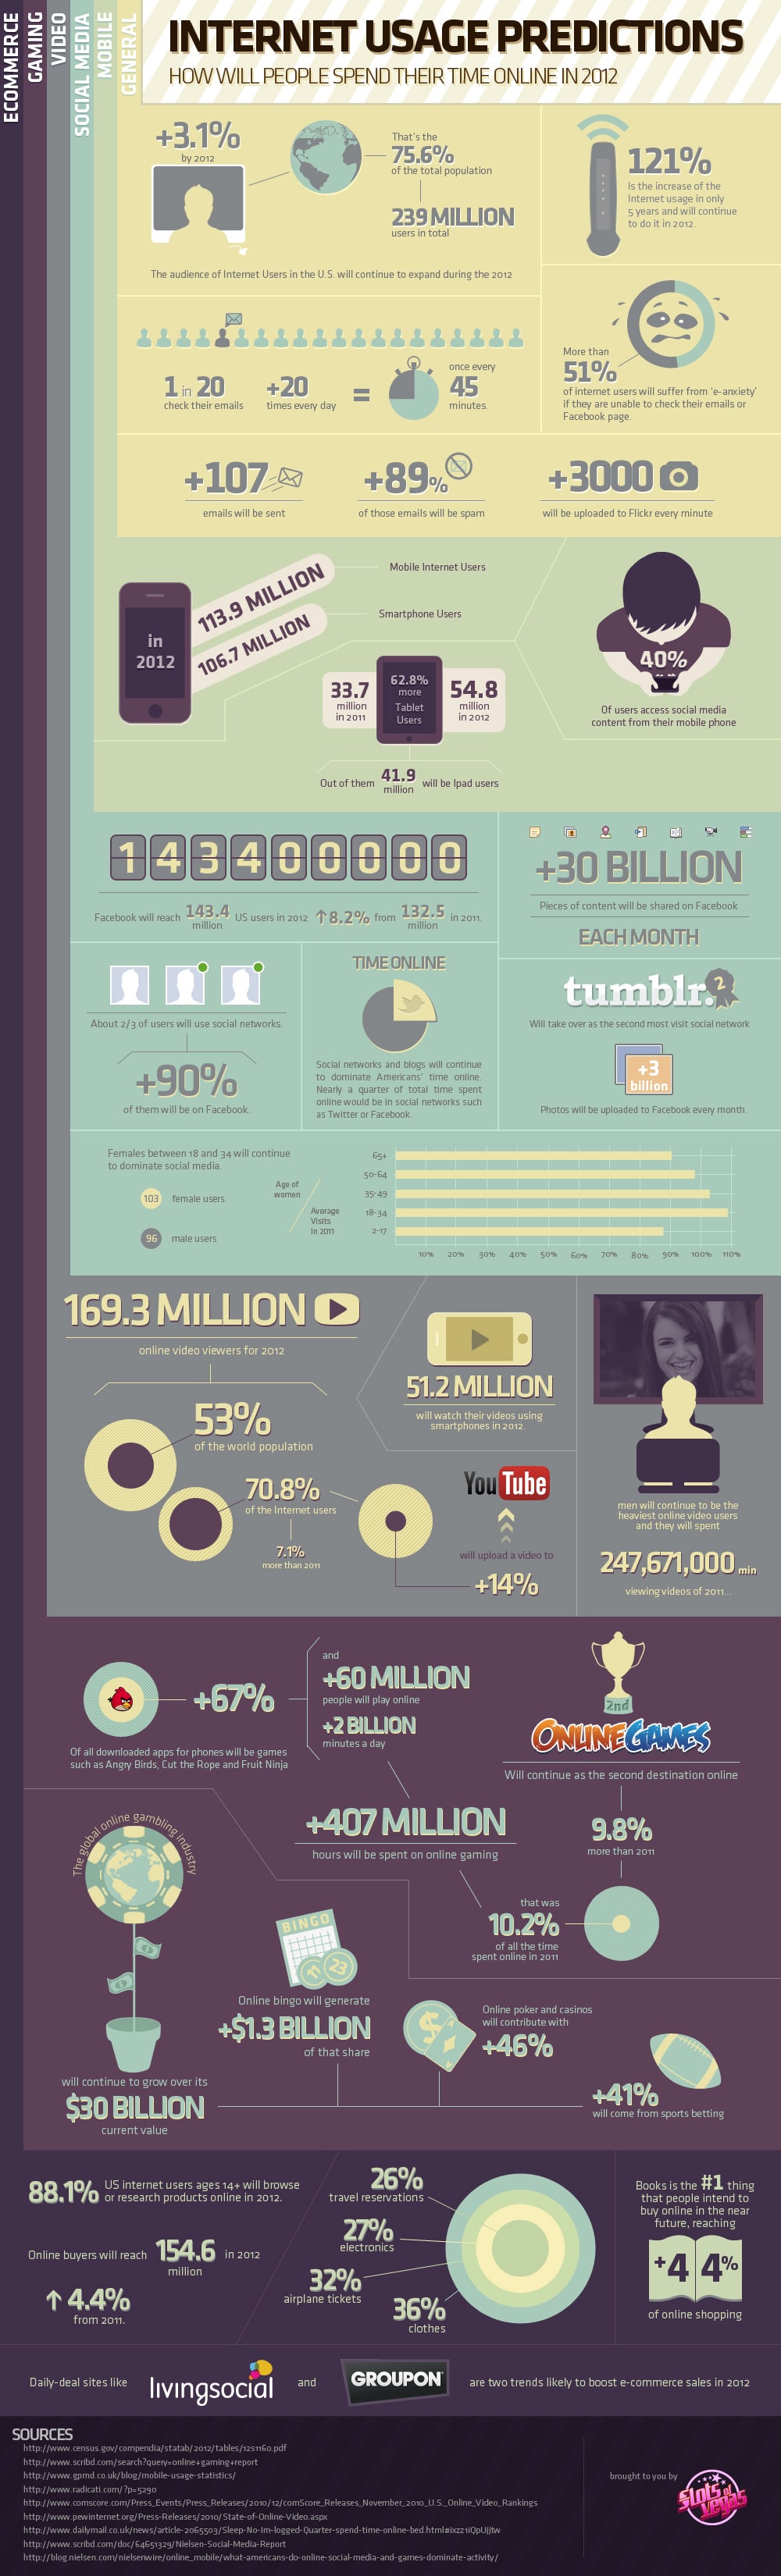 Internet Usage Predictions For 2012 [Infographic]